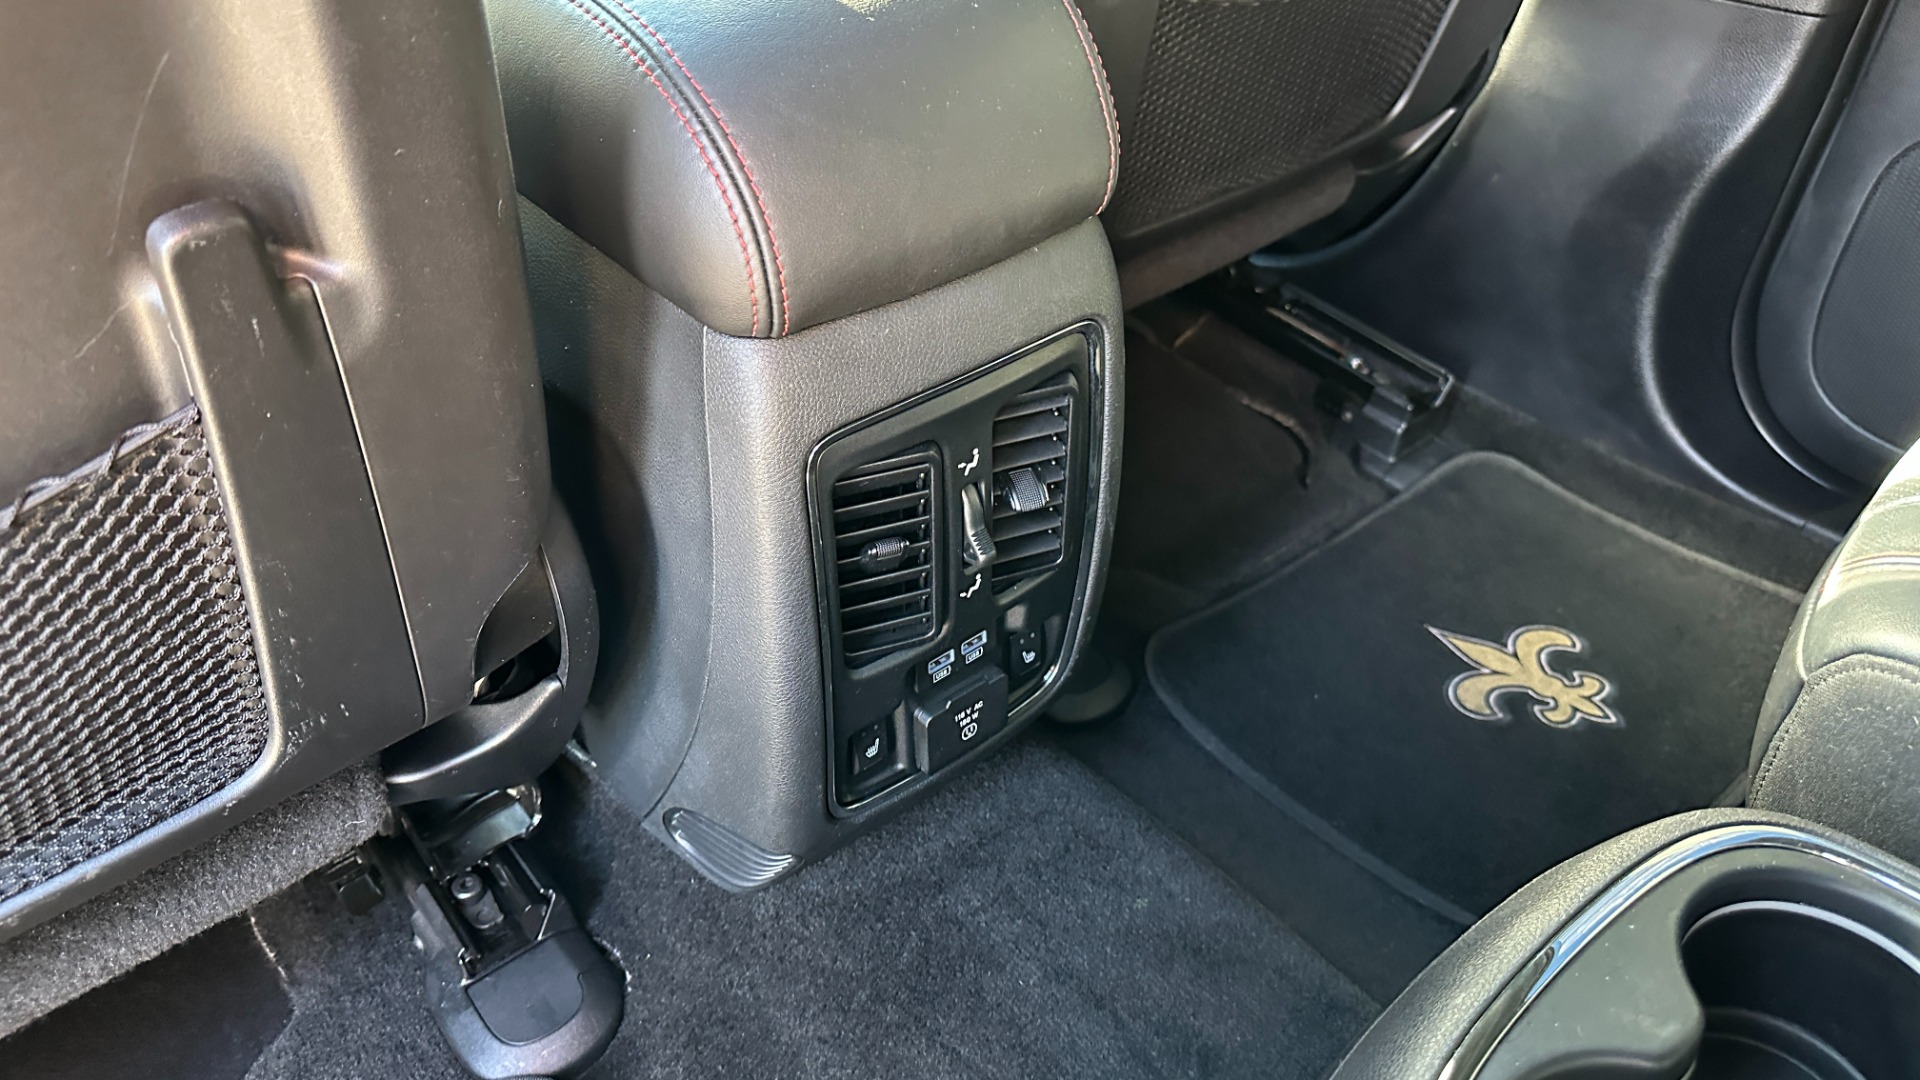 Used 2015 Dodge Durango R/T / HEMI V8 / CAPTAINS CHAIRS / 3 ROW SEATING / TECH PKG / NAPPA LEATHER  for sale $23,995 at Formula Imports in Charlotte NC 28227 29